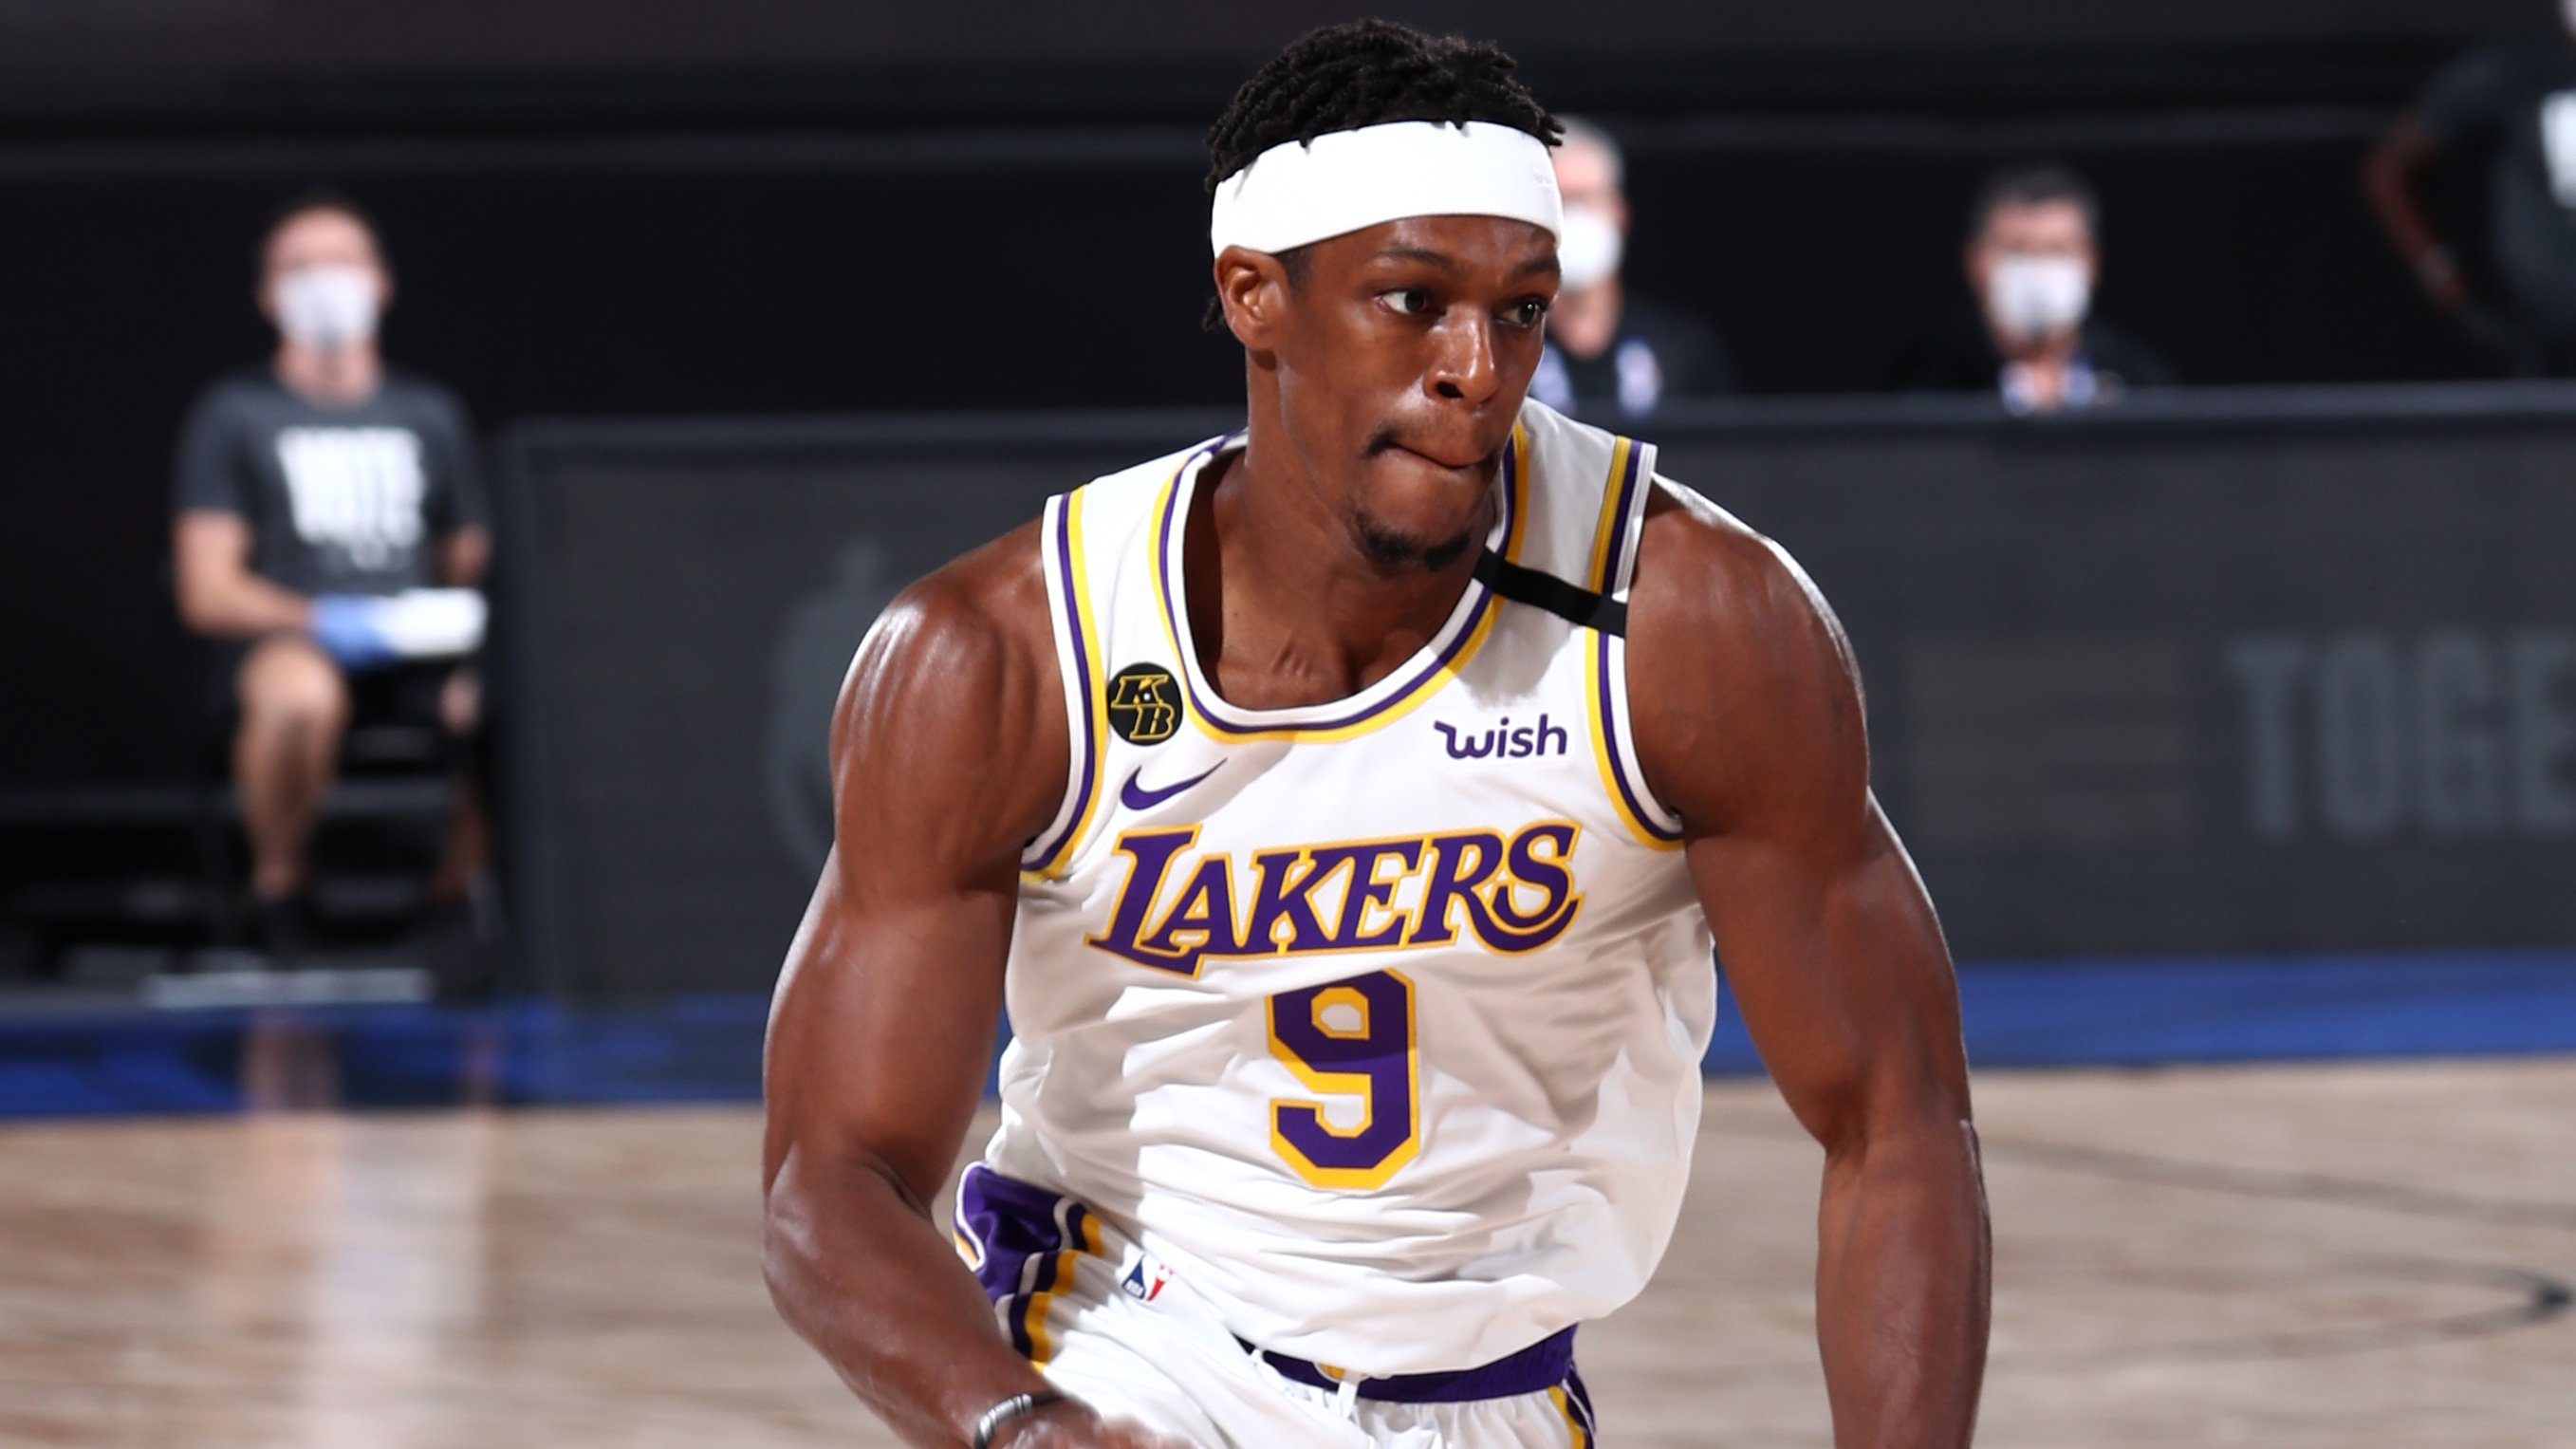 Rondo likely to reunite with Lakers after being waived by Grizzlies – reports